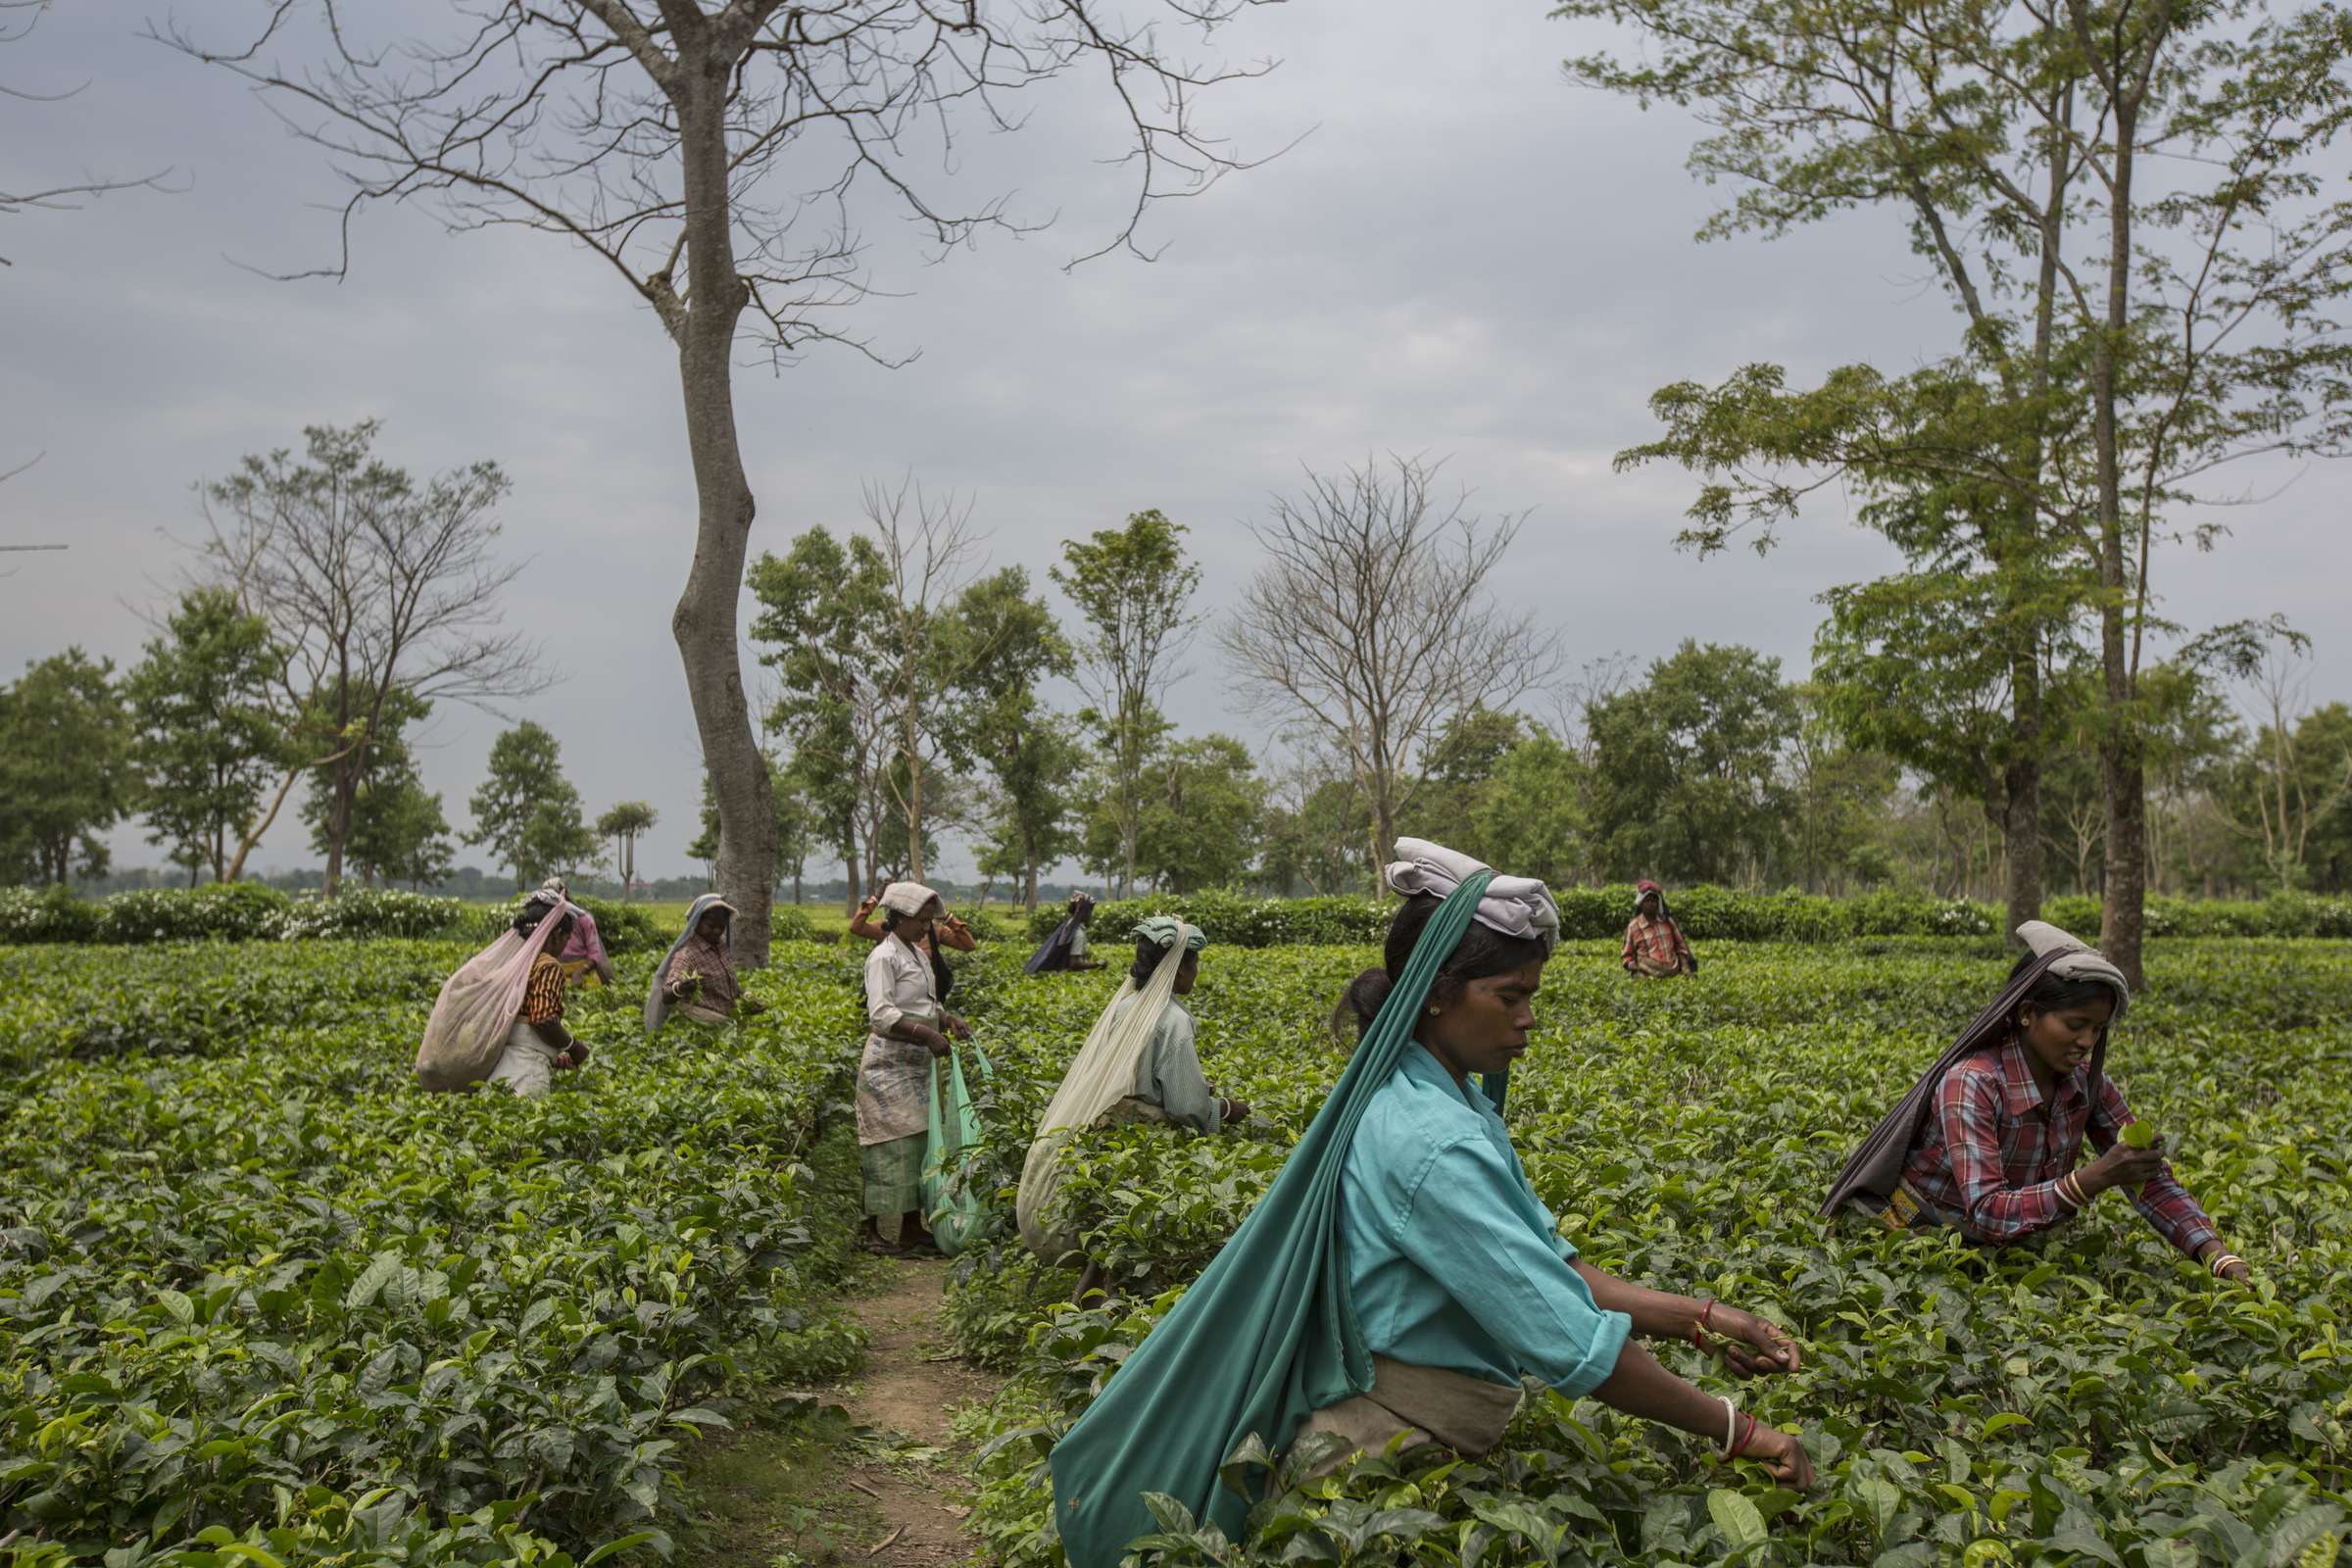 Workers endure poverty little changed since their 19th century ancestors began work as bonded labourers, and as industry declines and tea gardens close they struggle for food and are prey to human traffickers